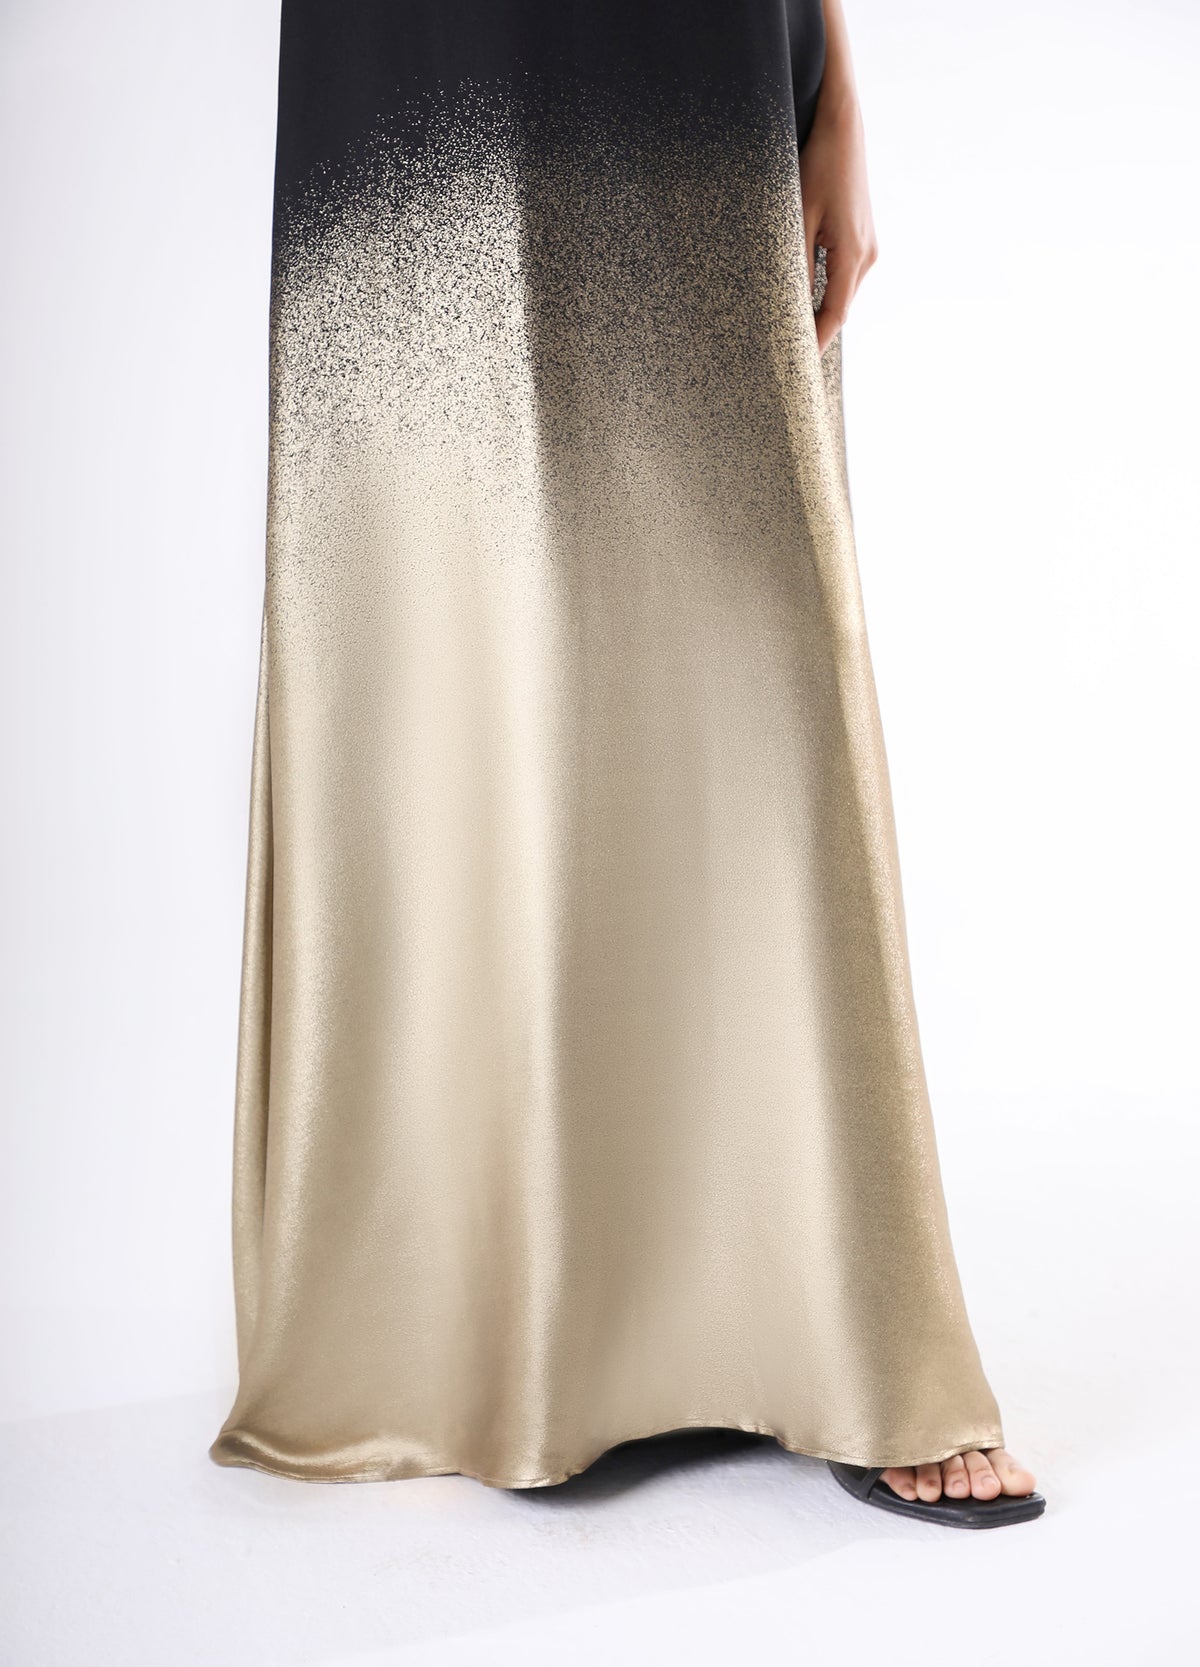 Roma dress - Black to gold ombre